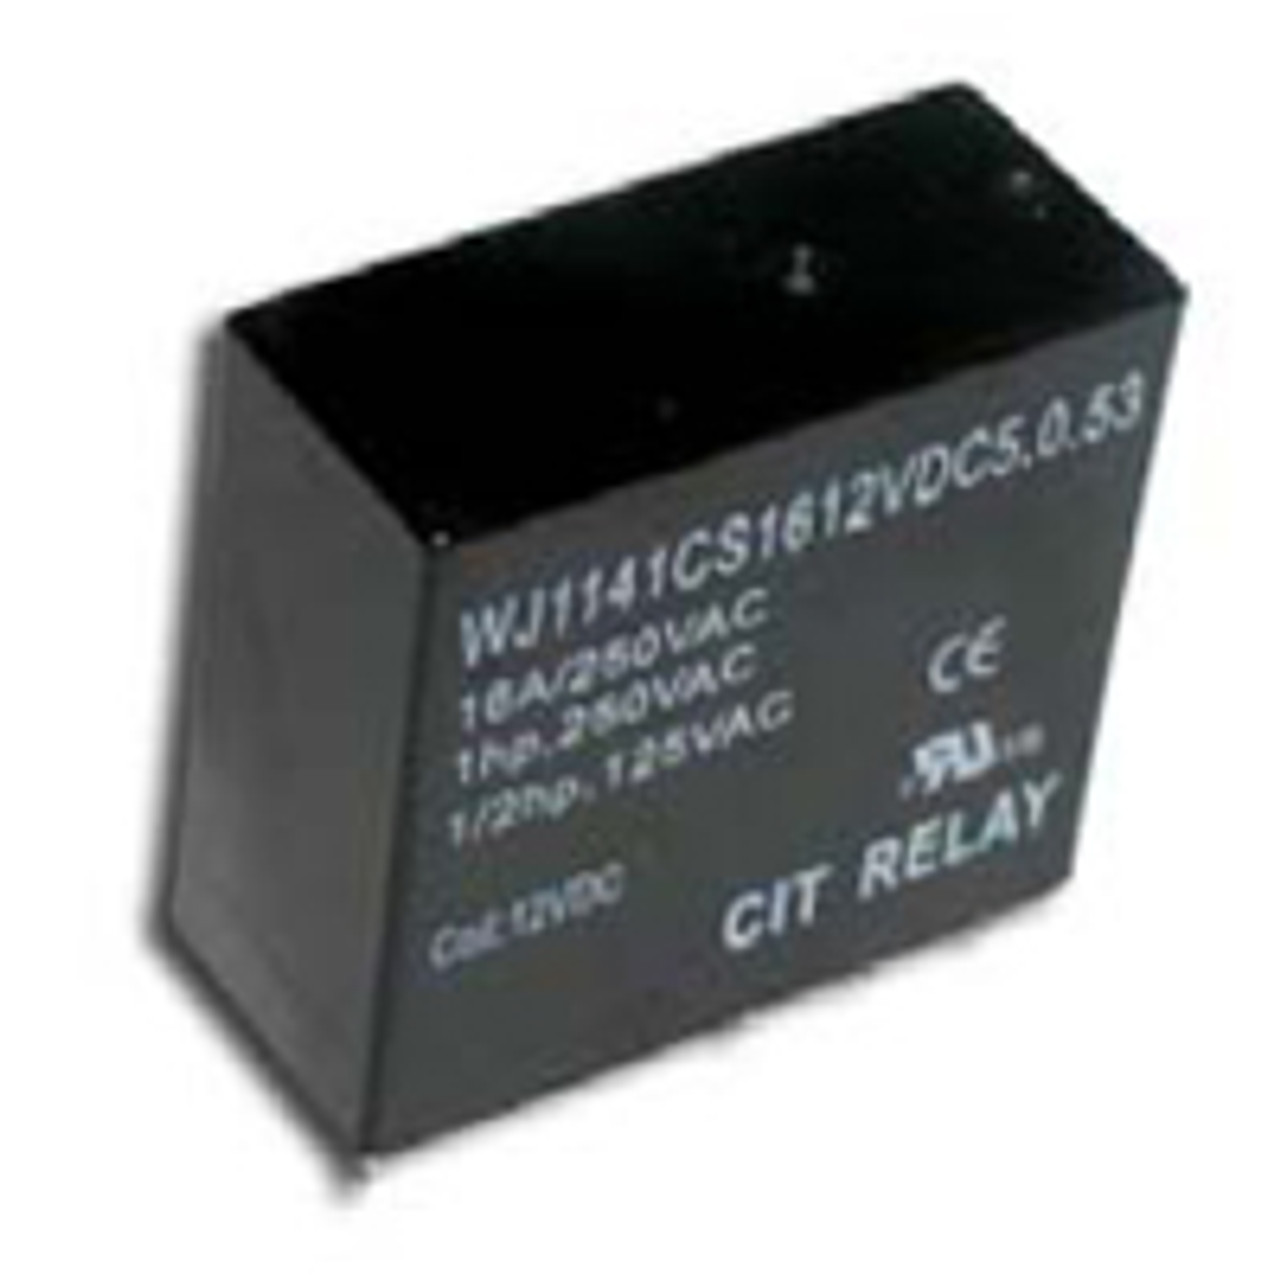 CIT Relay and Switch J1141AS1624VDC5.0.53 Power Relays